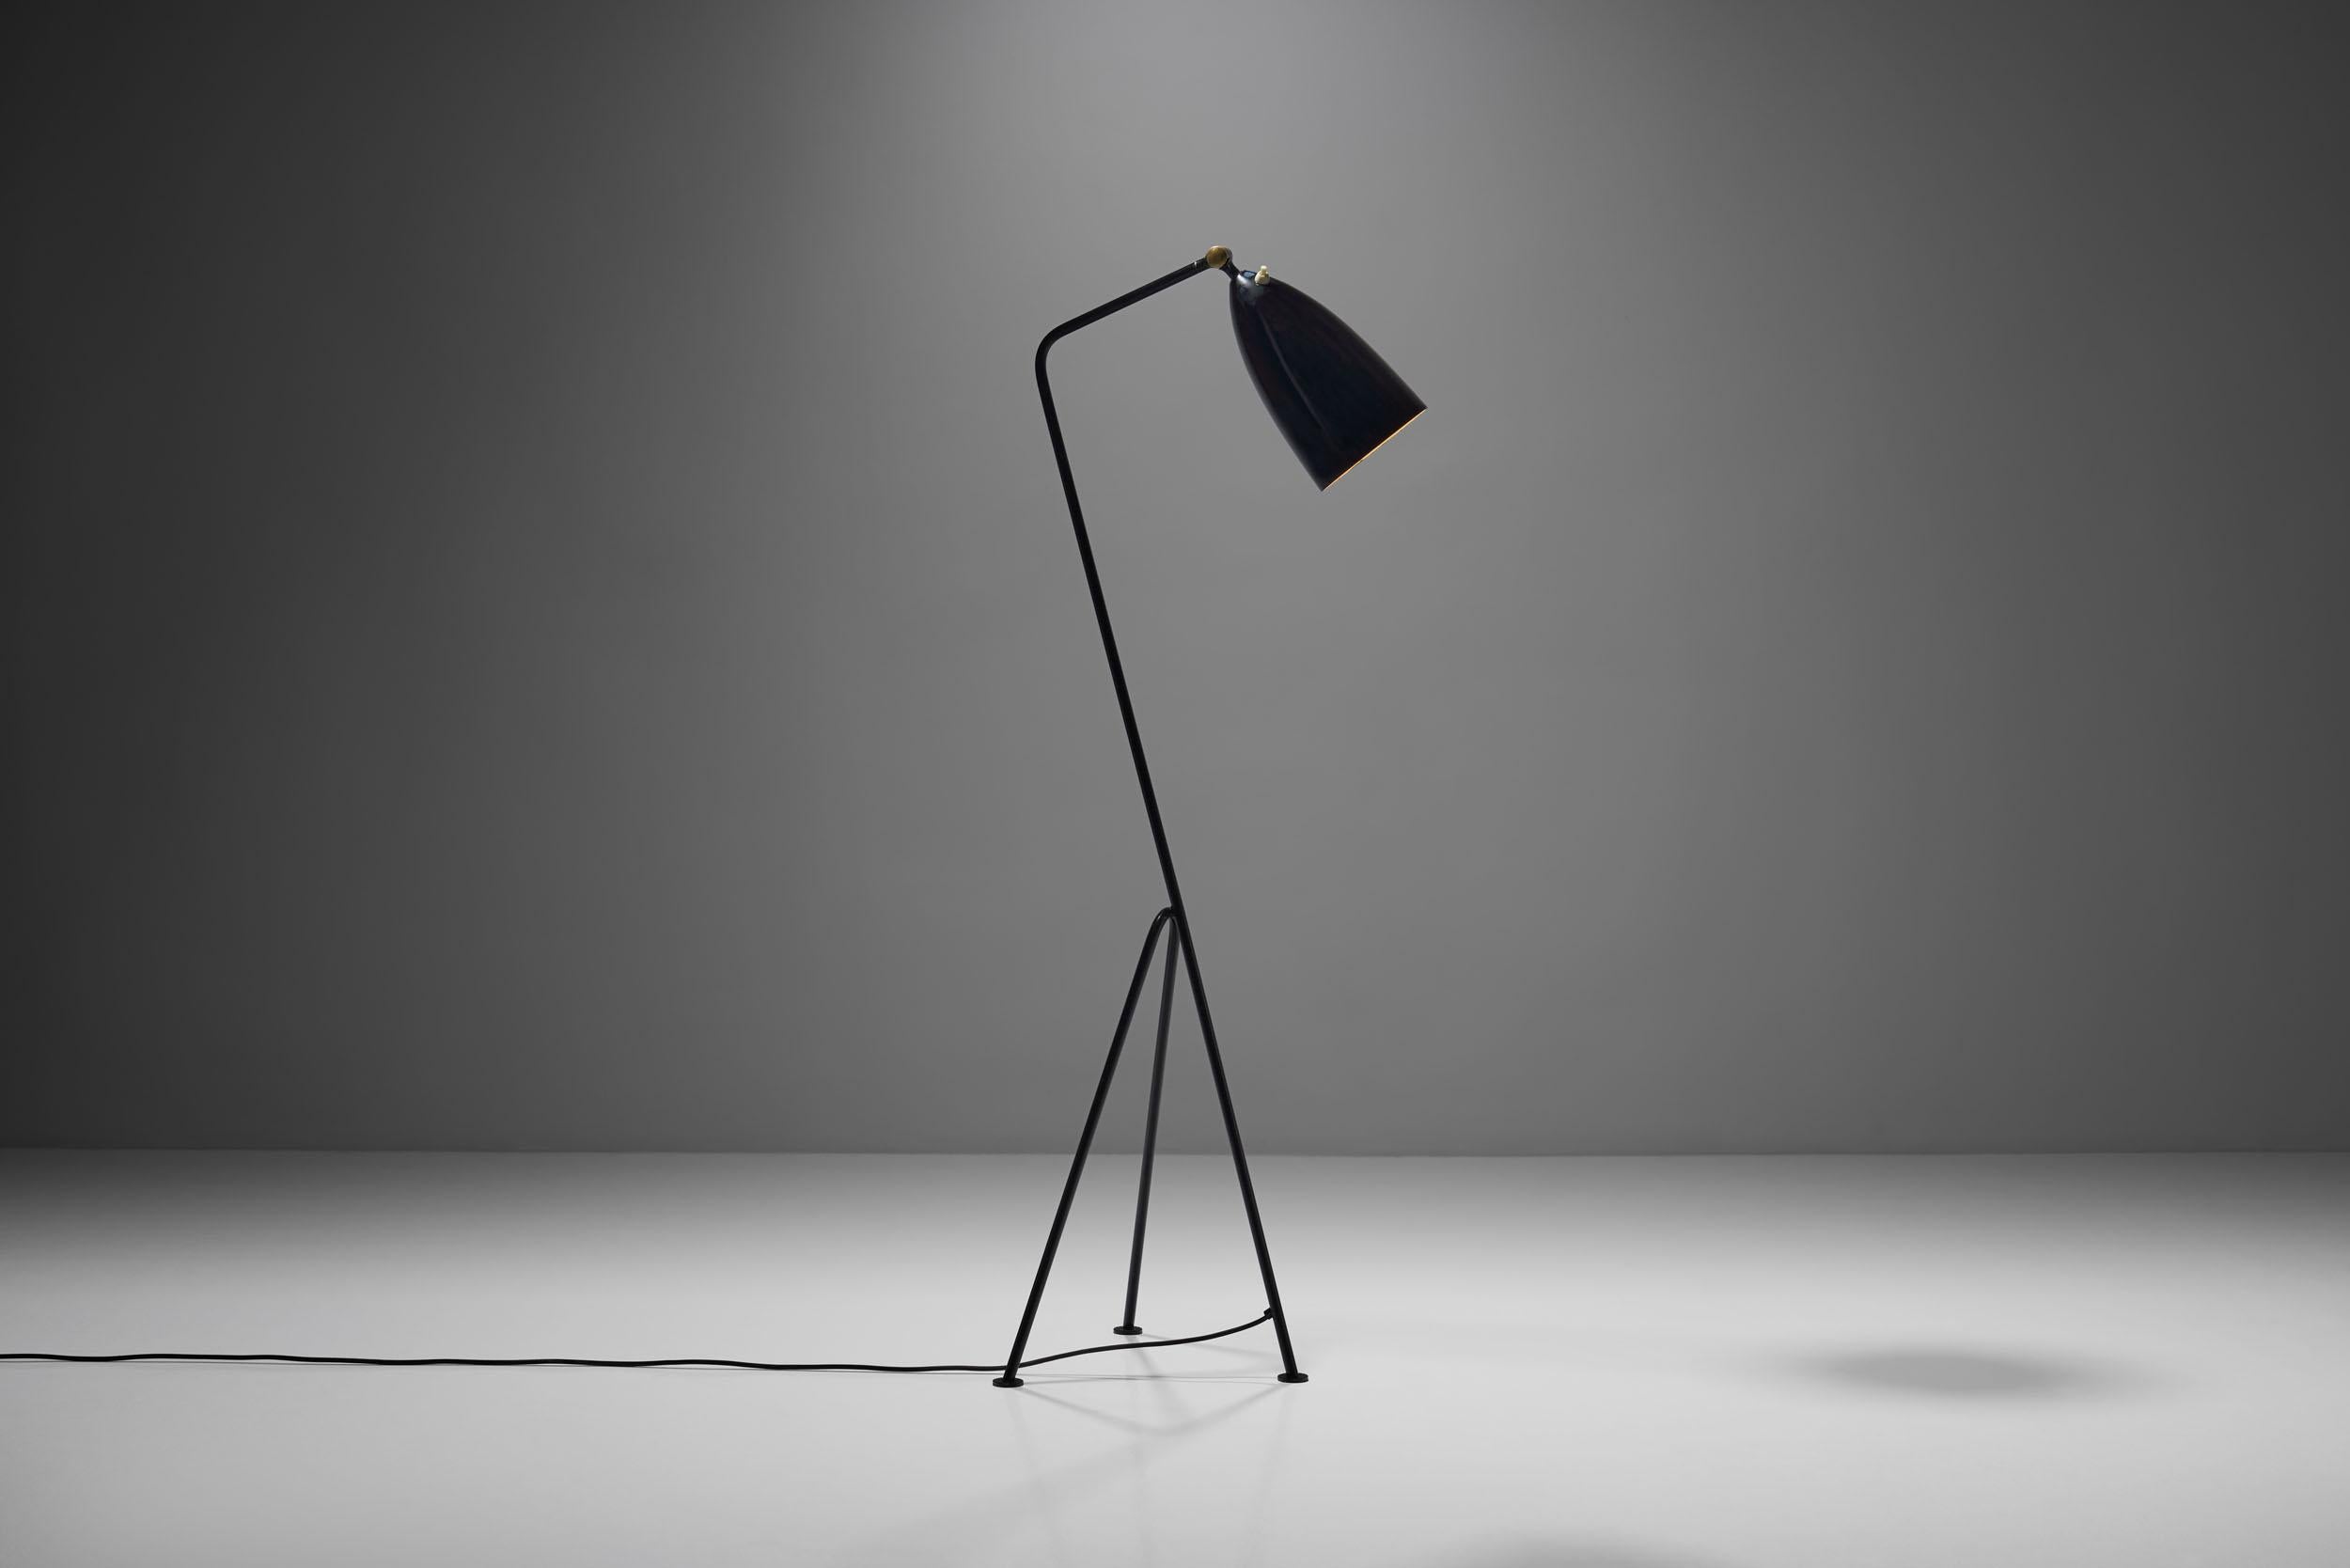 Greta Magnusson Grossman’s 1947 design, the “Gräshoppa” or the “G-33” model is among the most recognisable and known floor lamps of Scandinavian Modernism. Its signature appearance is based on the backwards-tilted tripod base and the simplistic